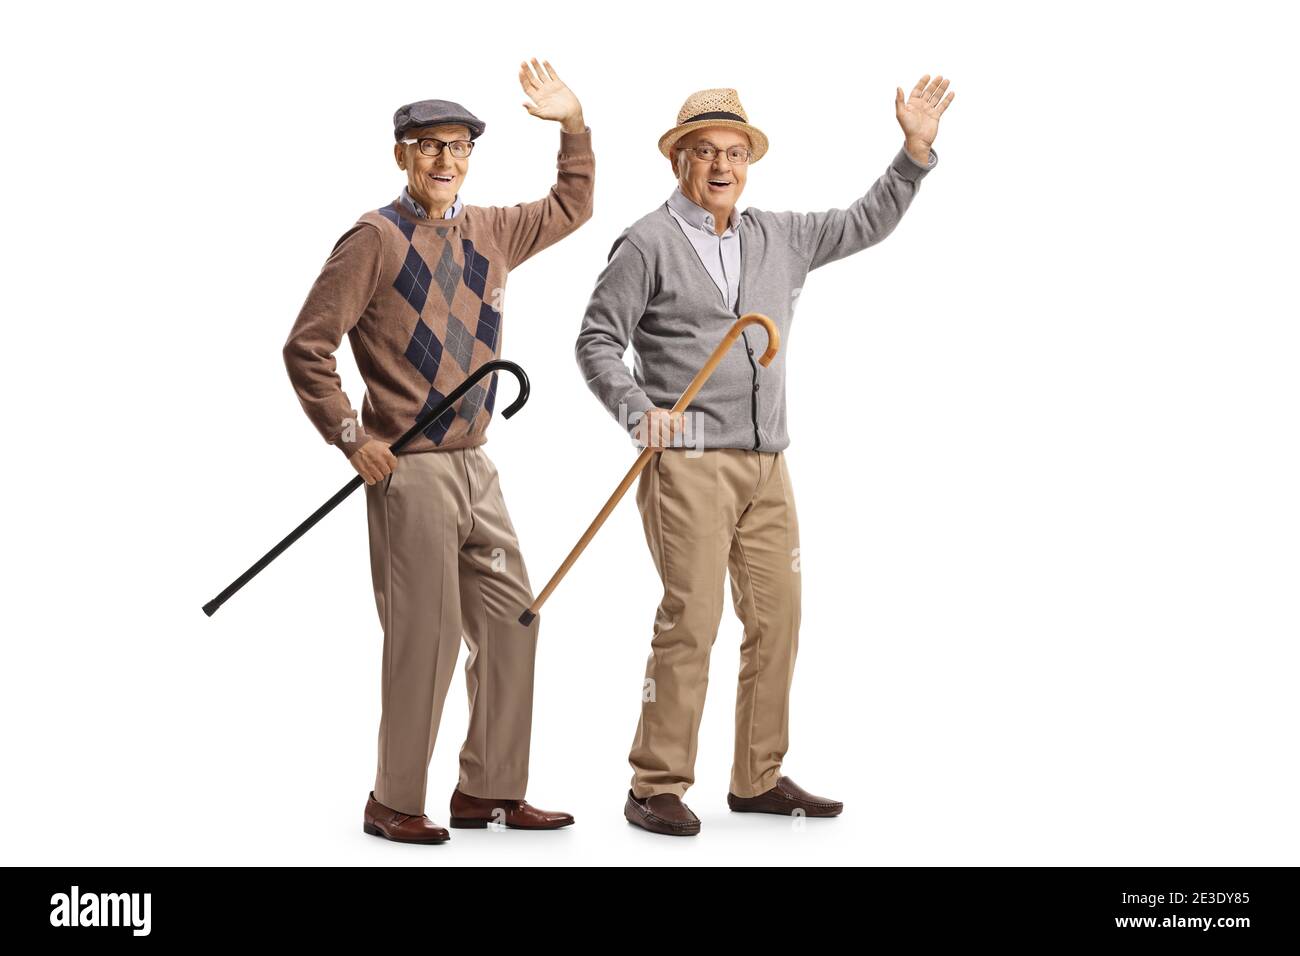 Cheerful elderly men with walking canes waving at the camera isolated on white background Stock Photo